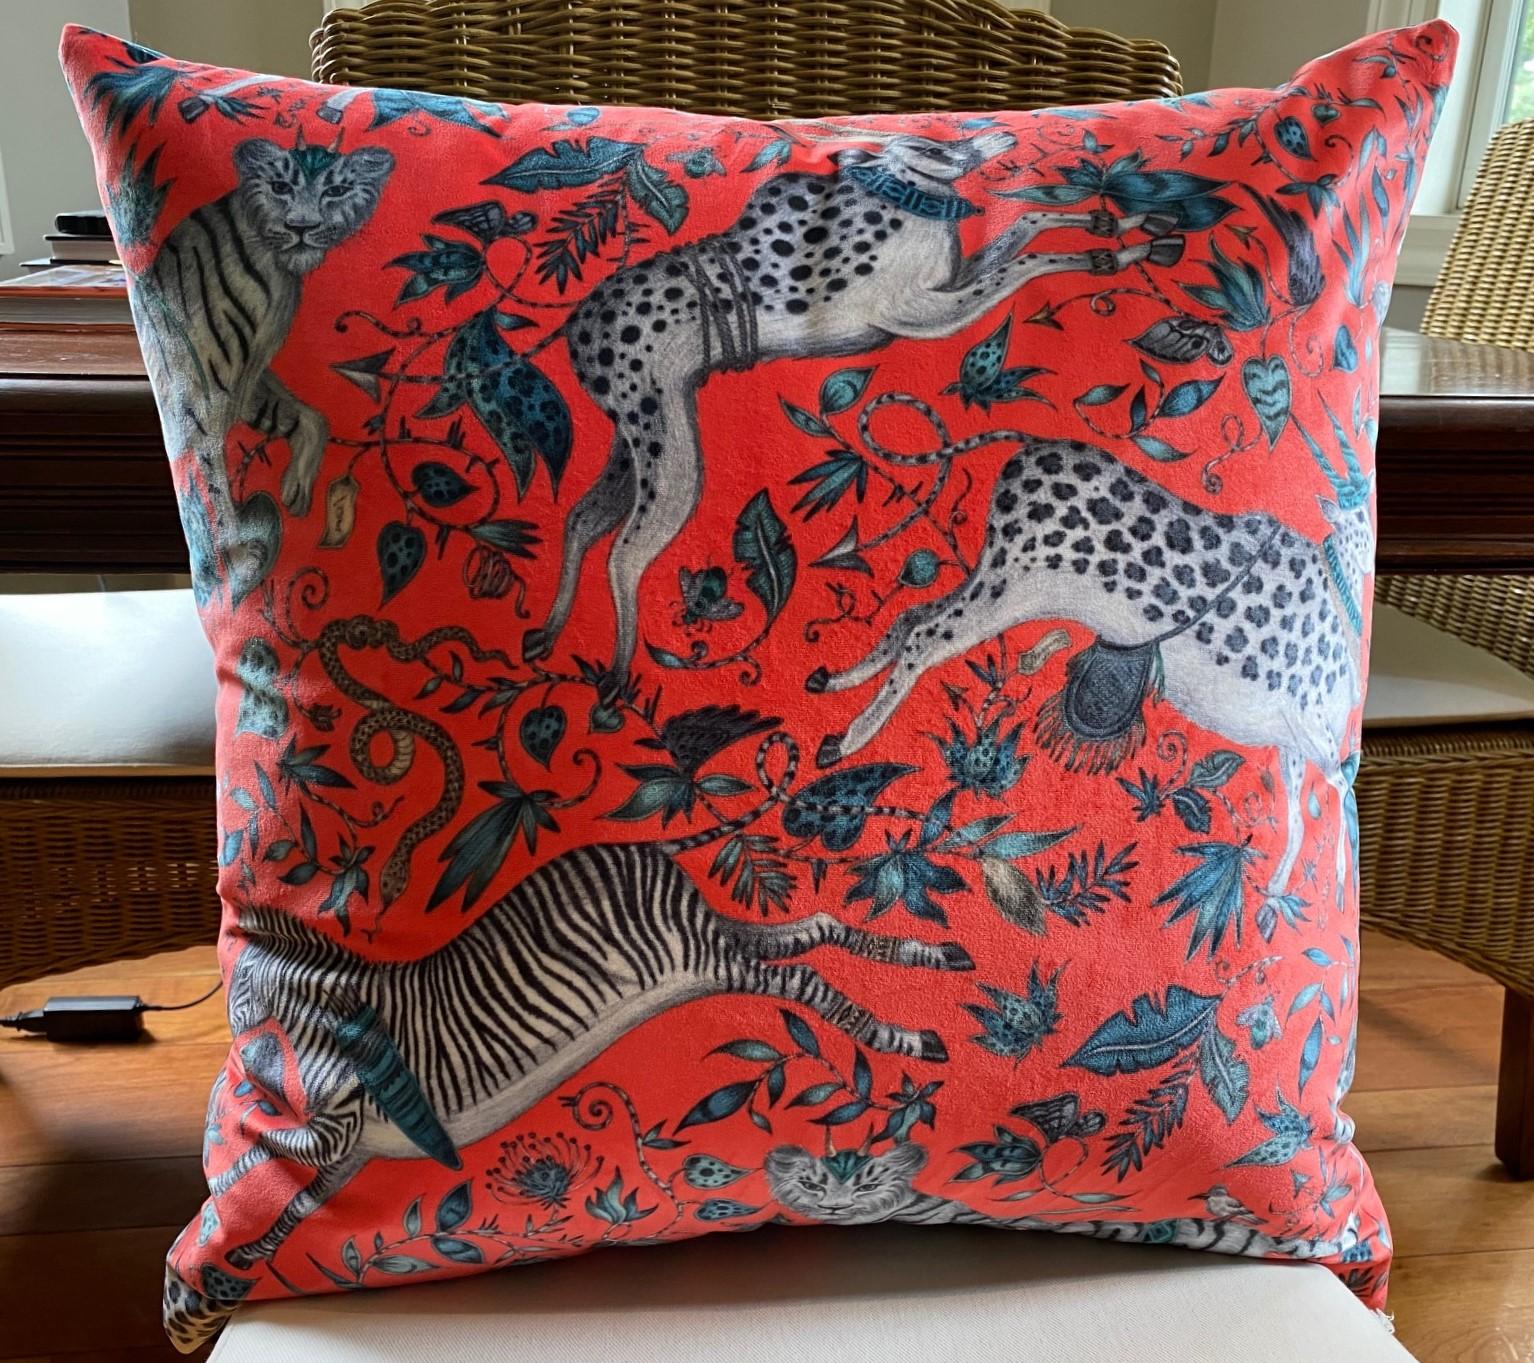 Knife-edge square pillow (zippered case and down insert) in bright coral red Protea Velvet - Emma J Shipley (front) and contrasting teal cotton velvet (back). Custom-made by an expert tailor.

